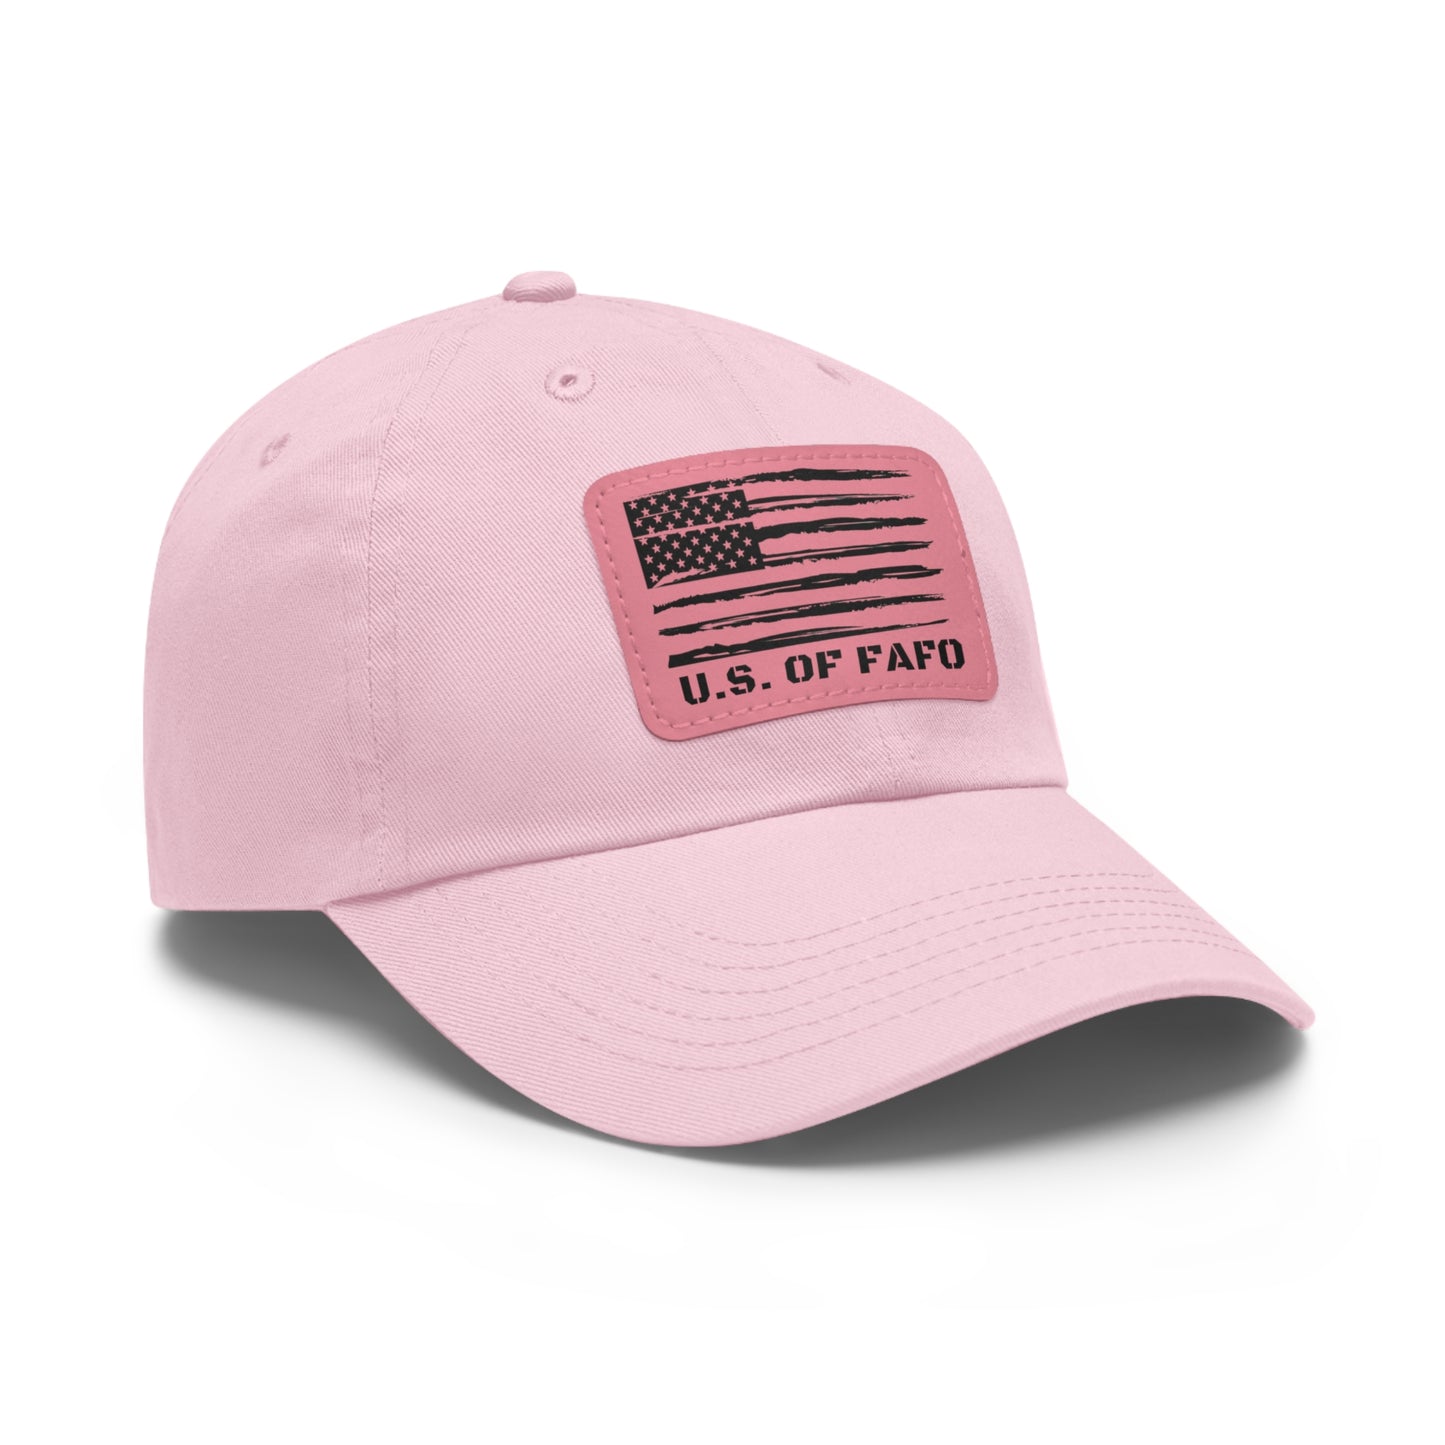 “THE UNITED STATES OF FAFO” Leather Patch Hat